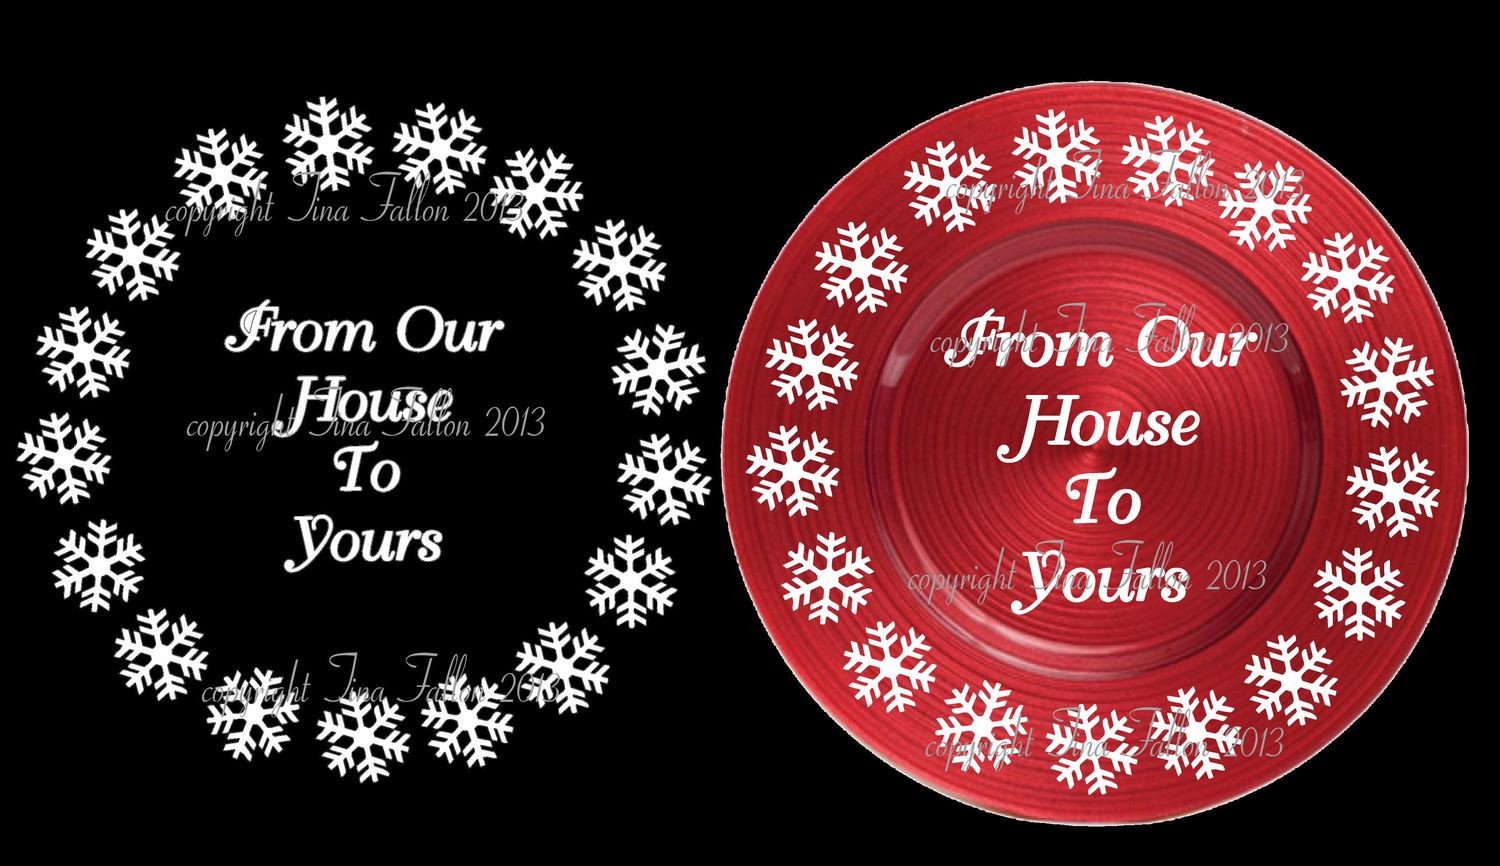 Our House To Yours Vinyl design for Christmas charger plates